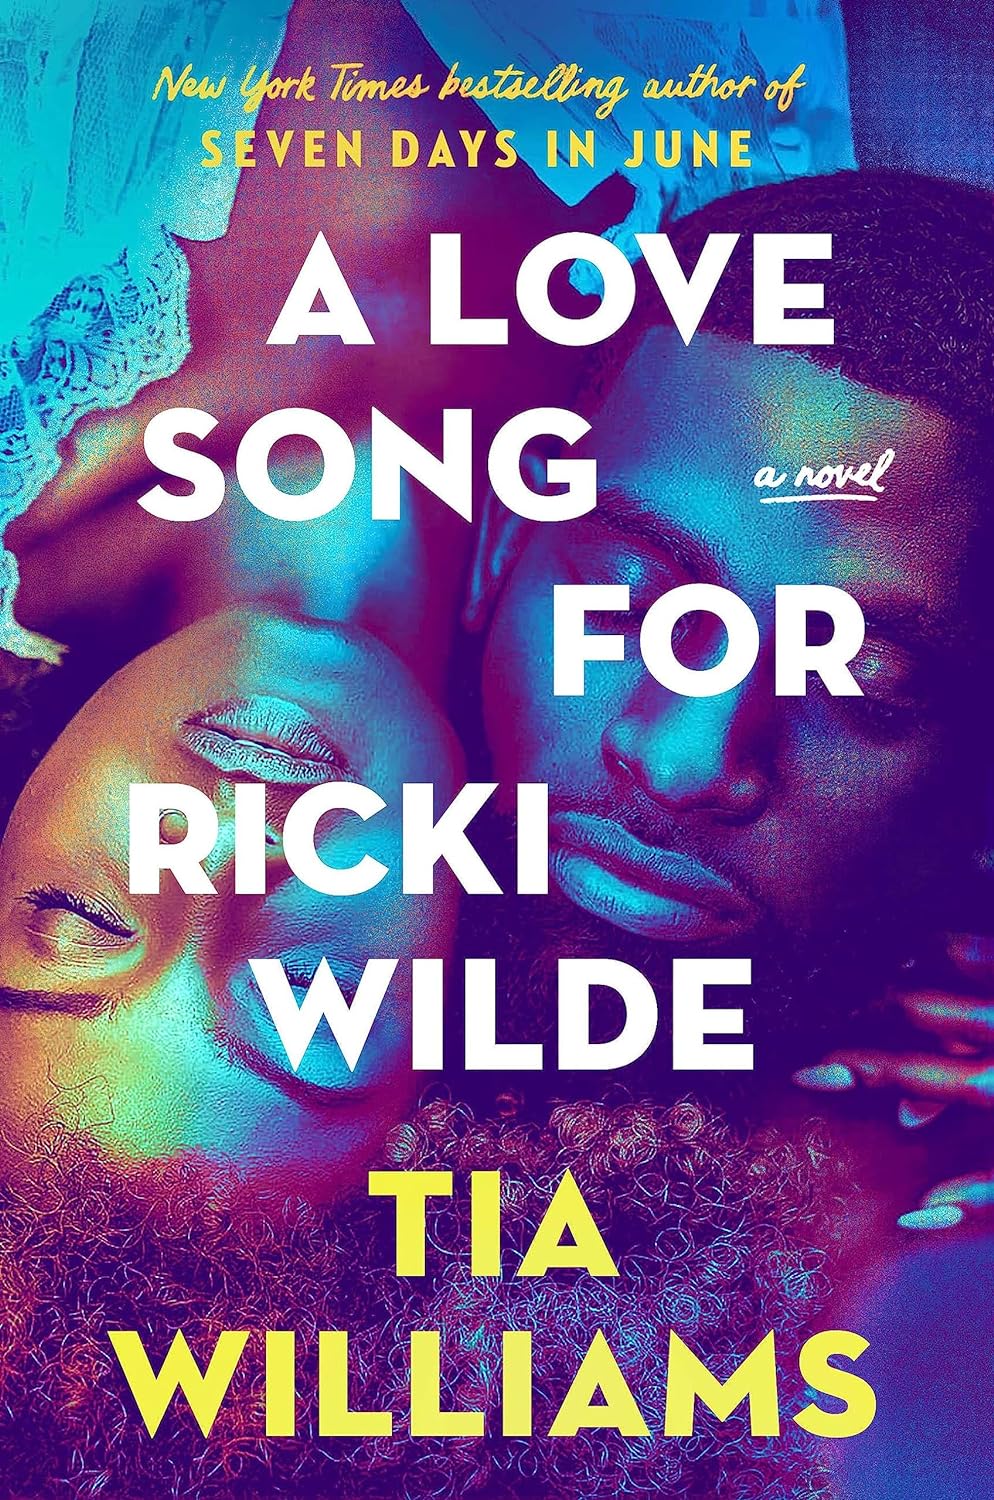 One of our recommended books is A Love Song for Ricki Wilde by Tia Williams